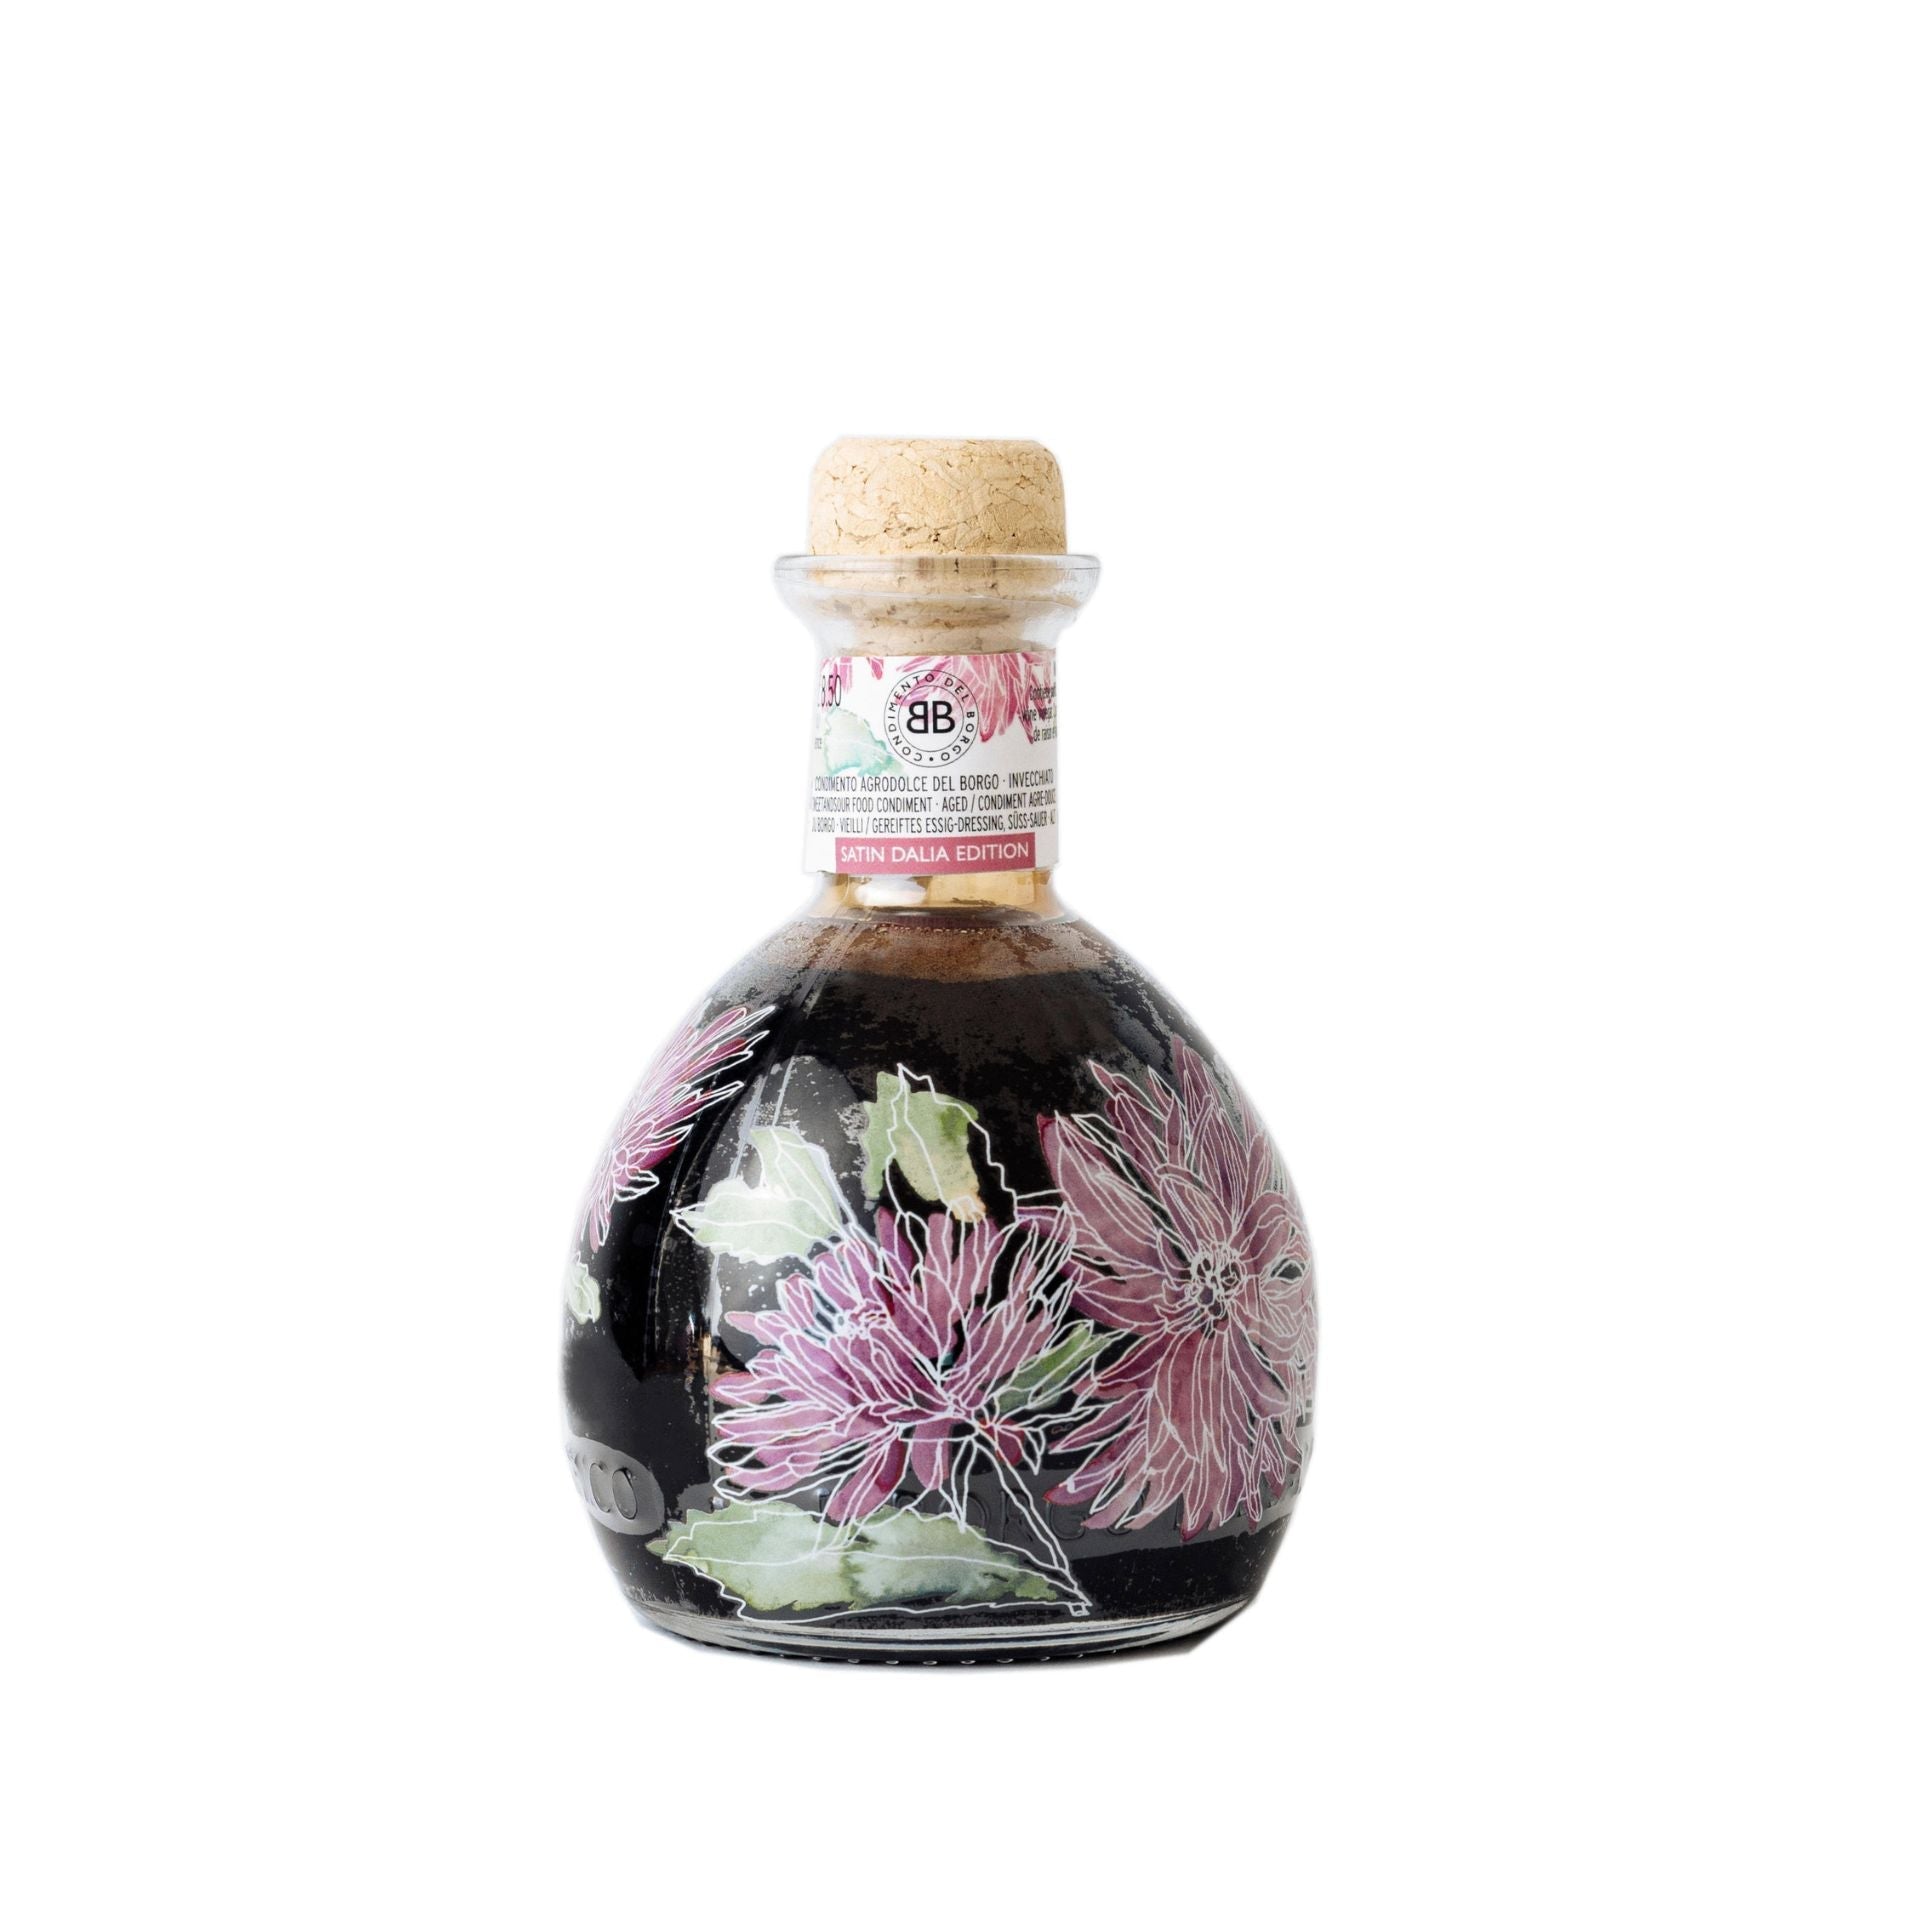 Il Borgo del Balsamico For the Earth Lovers. Mother Nature & Dahlia. Feast Italy